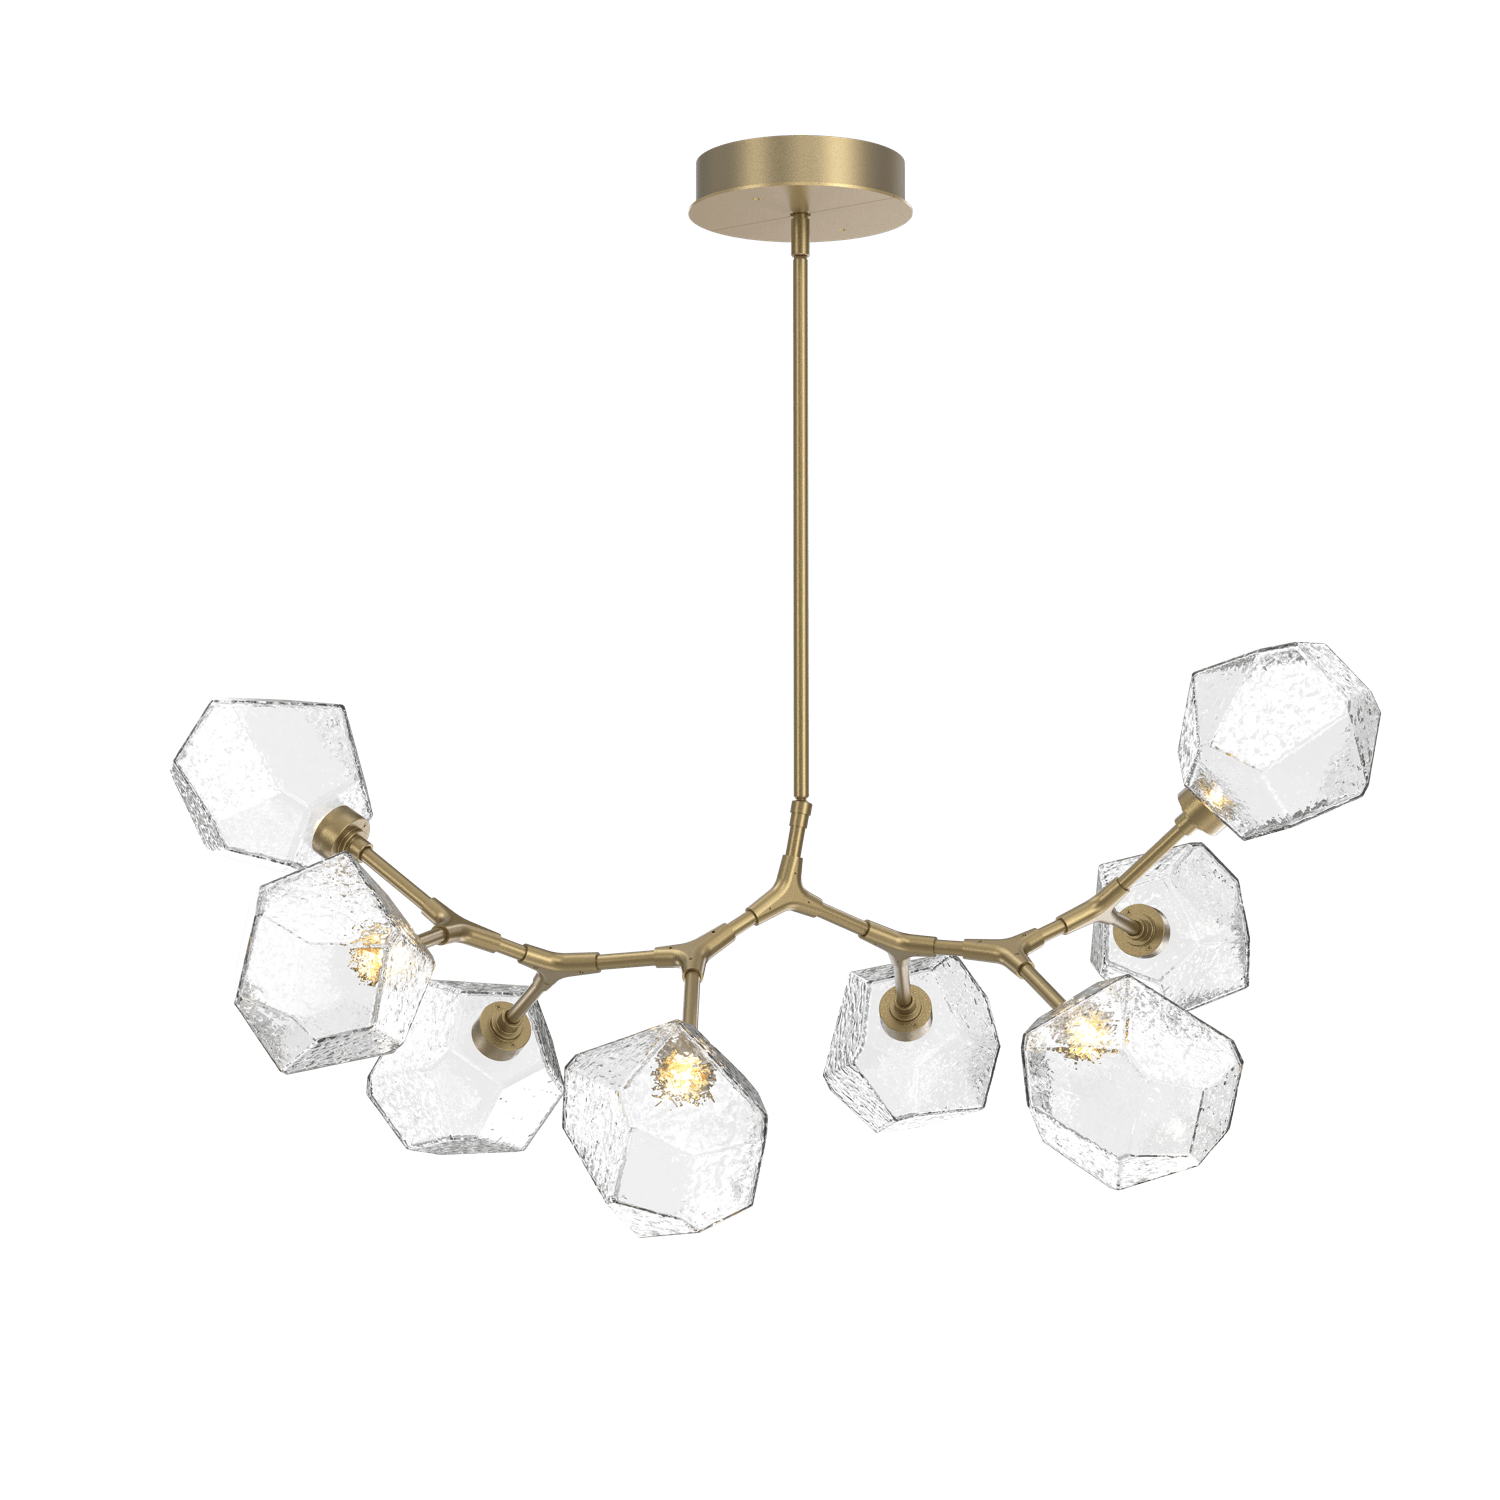 PLB0039-BB-GB-C-Hammerton-Studio-Gem-8-light-modern-branch-chandelier-with-gilded-brass-finish-and-clear-blown-glass-shades-and-LED-lamping